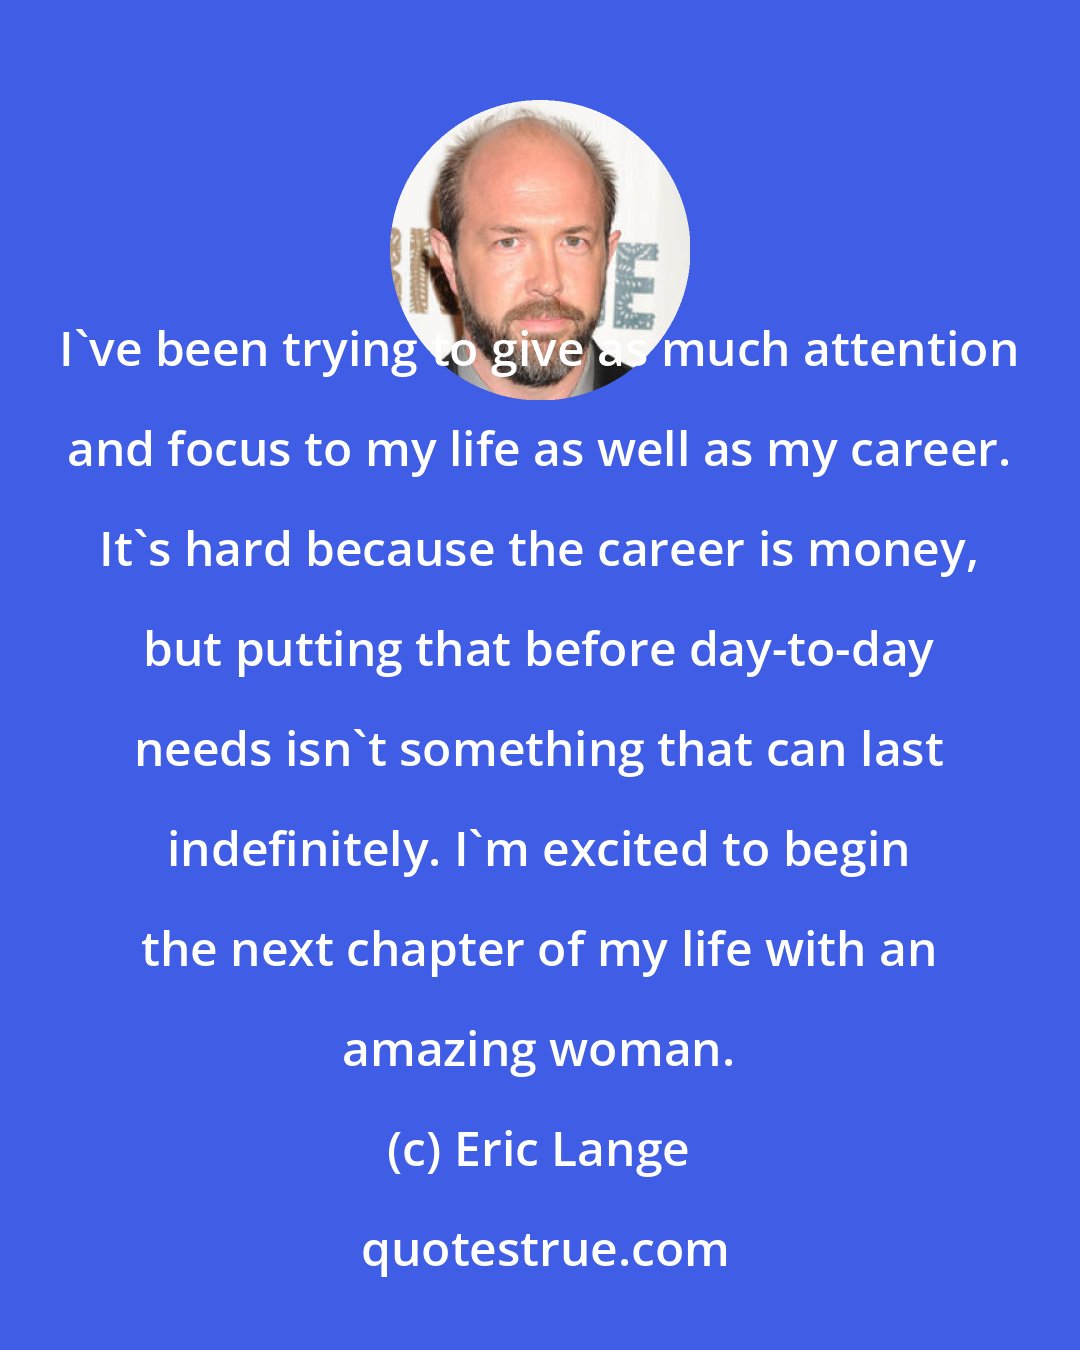 Eric Lange: I've been trying to give as much attention and focus to my life as well as my career. It's hard because the career is money, but putting that before day-to-day needs isn't something that can last indefinitely. I'm excited to begin the next chapter of my life with an amazing woman.